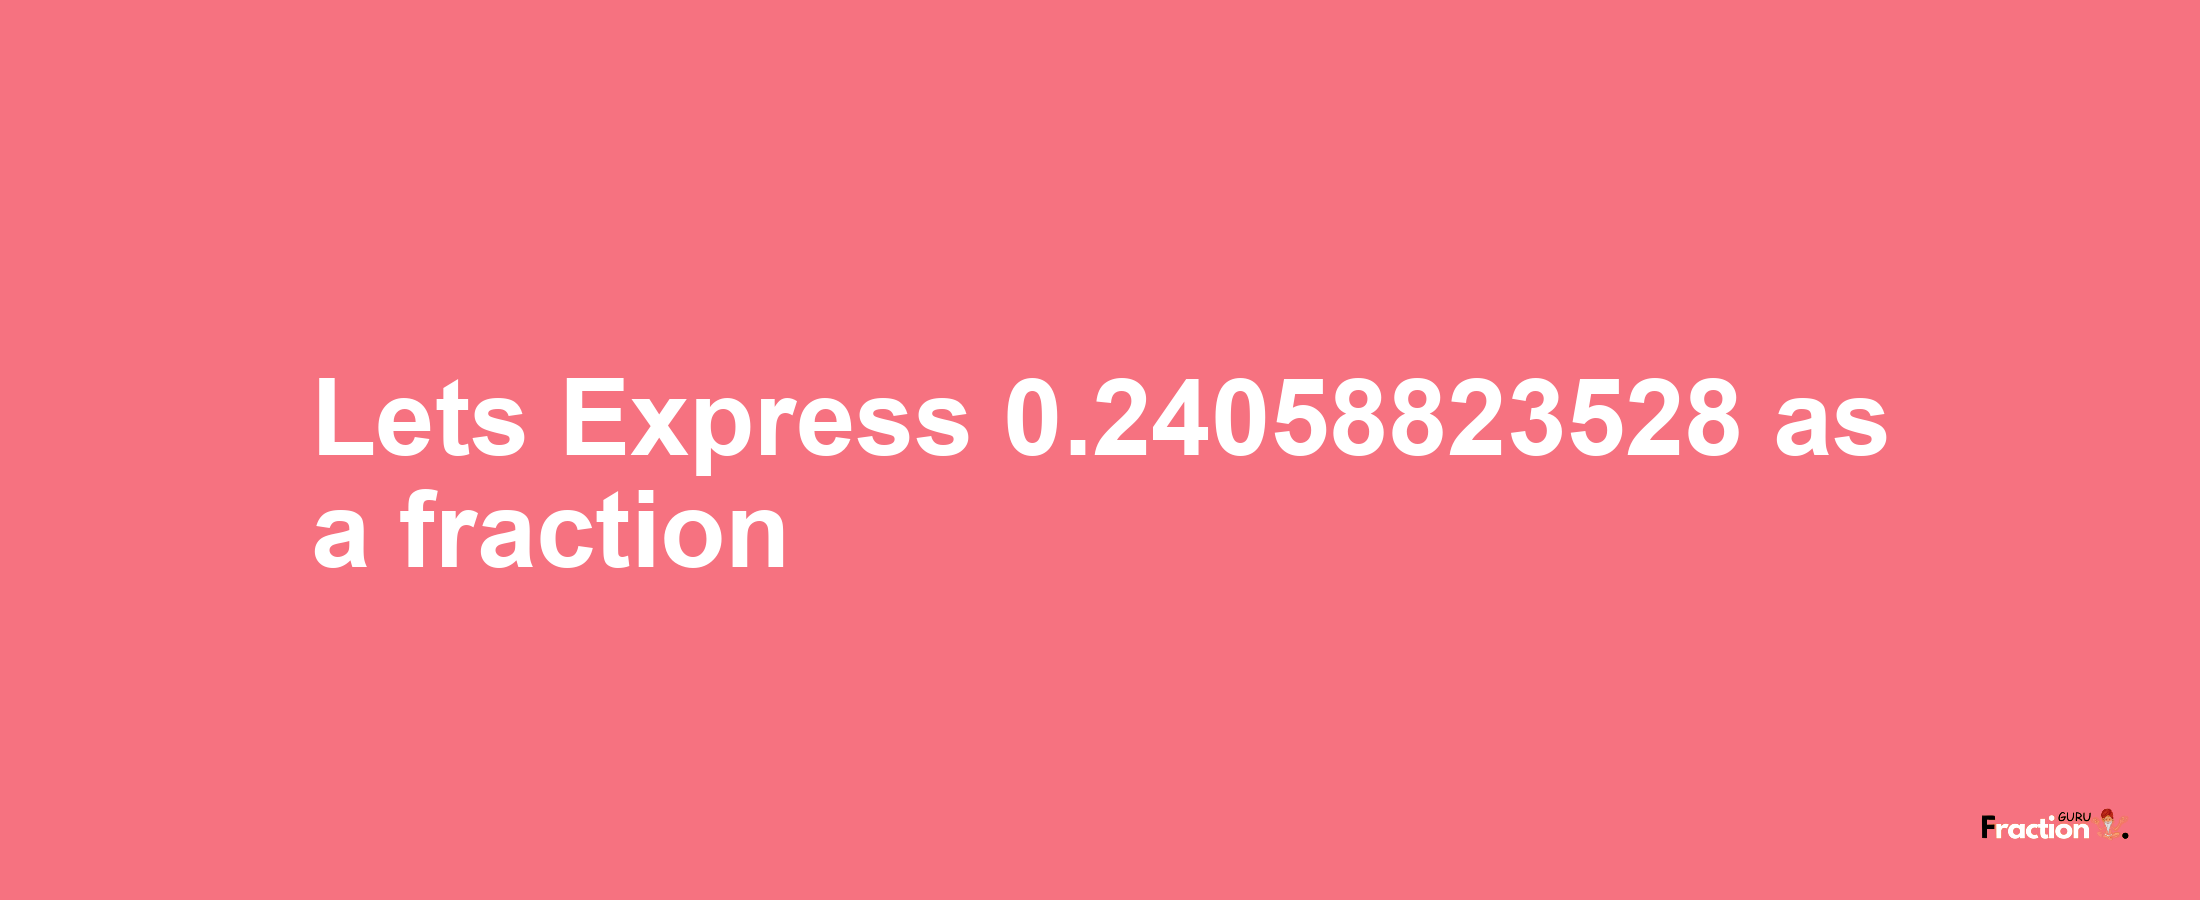 Lets Express 0.24058823528 as afraction